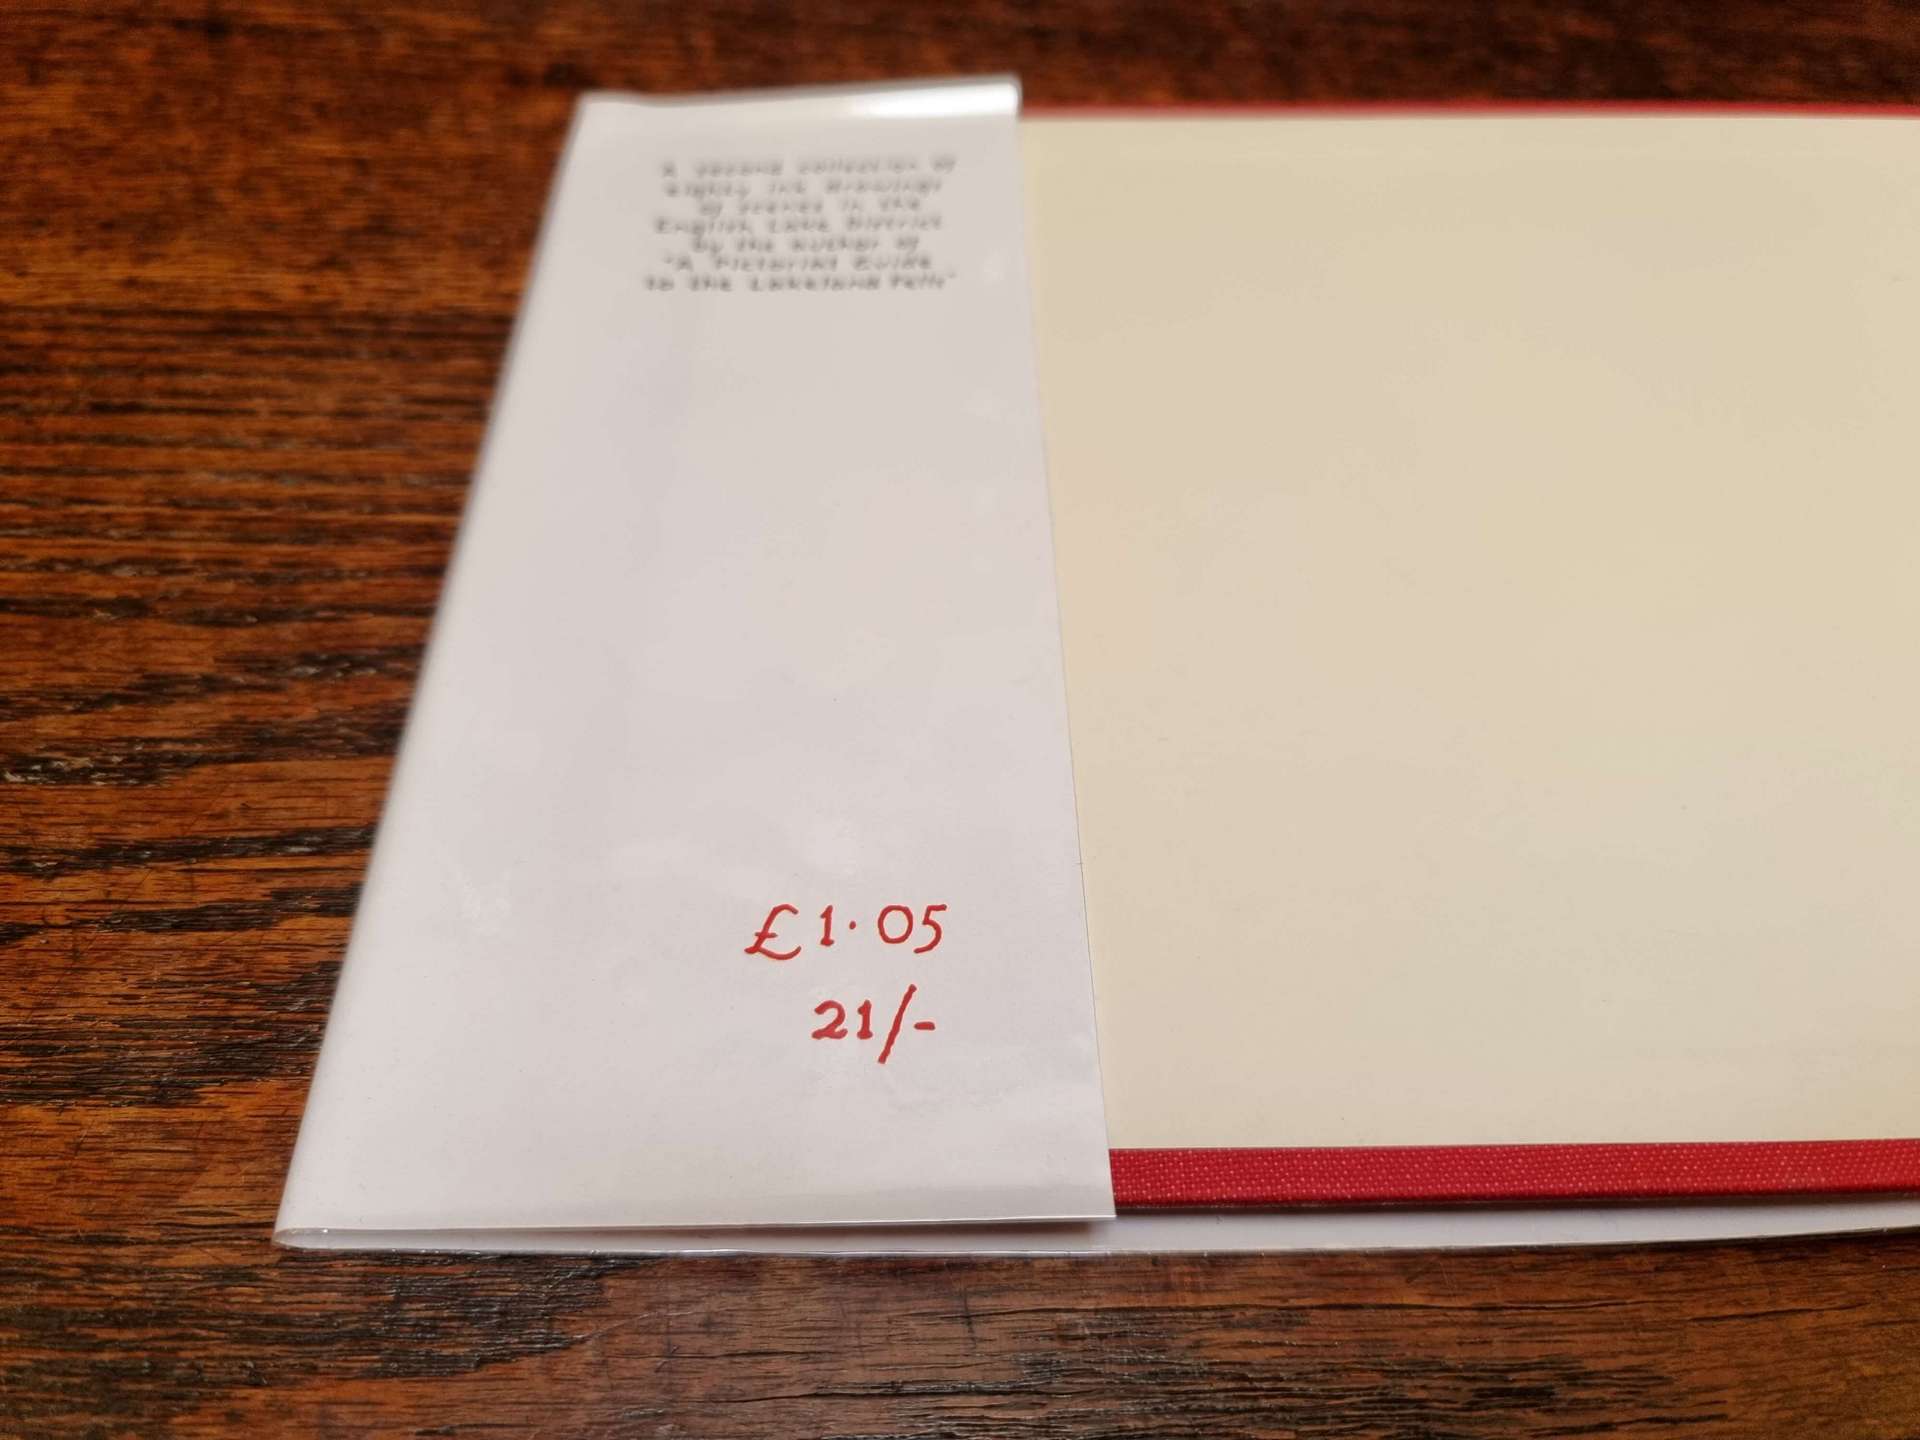 A Second Lakeland Sketchbook First Edition 21 Shillings